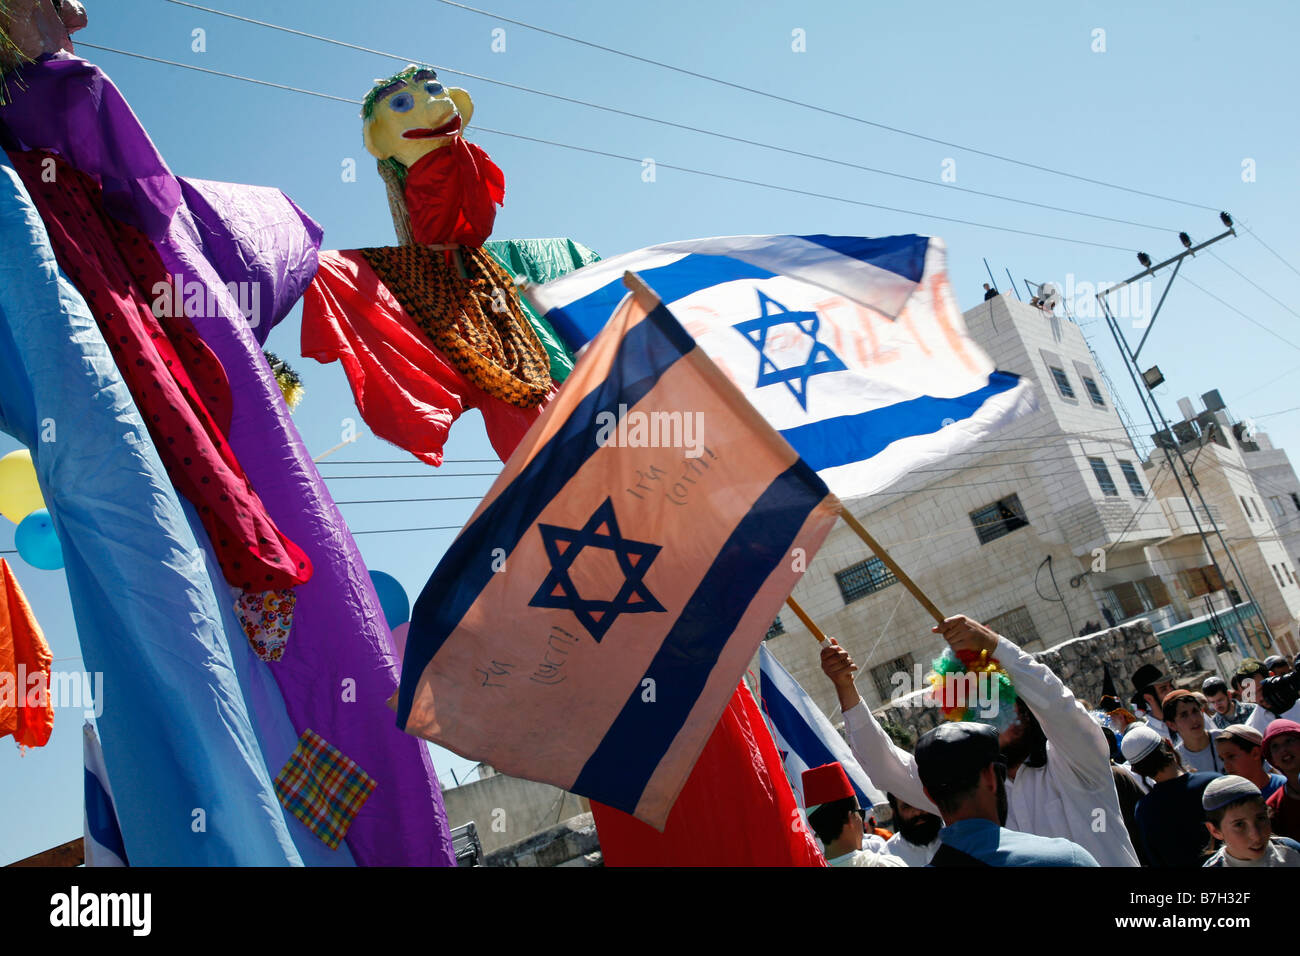 Purim celebration in the Israeli occupied old city of Palestinian Hebron in the West Bank. Stock Photo